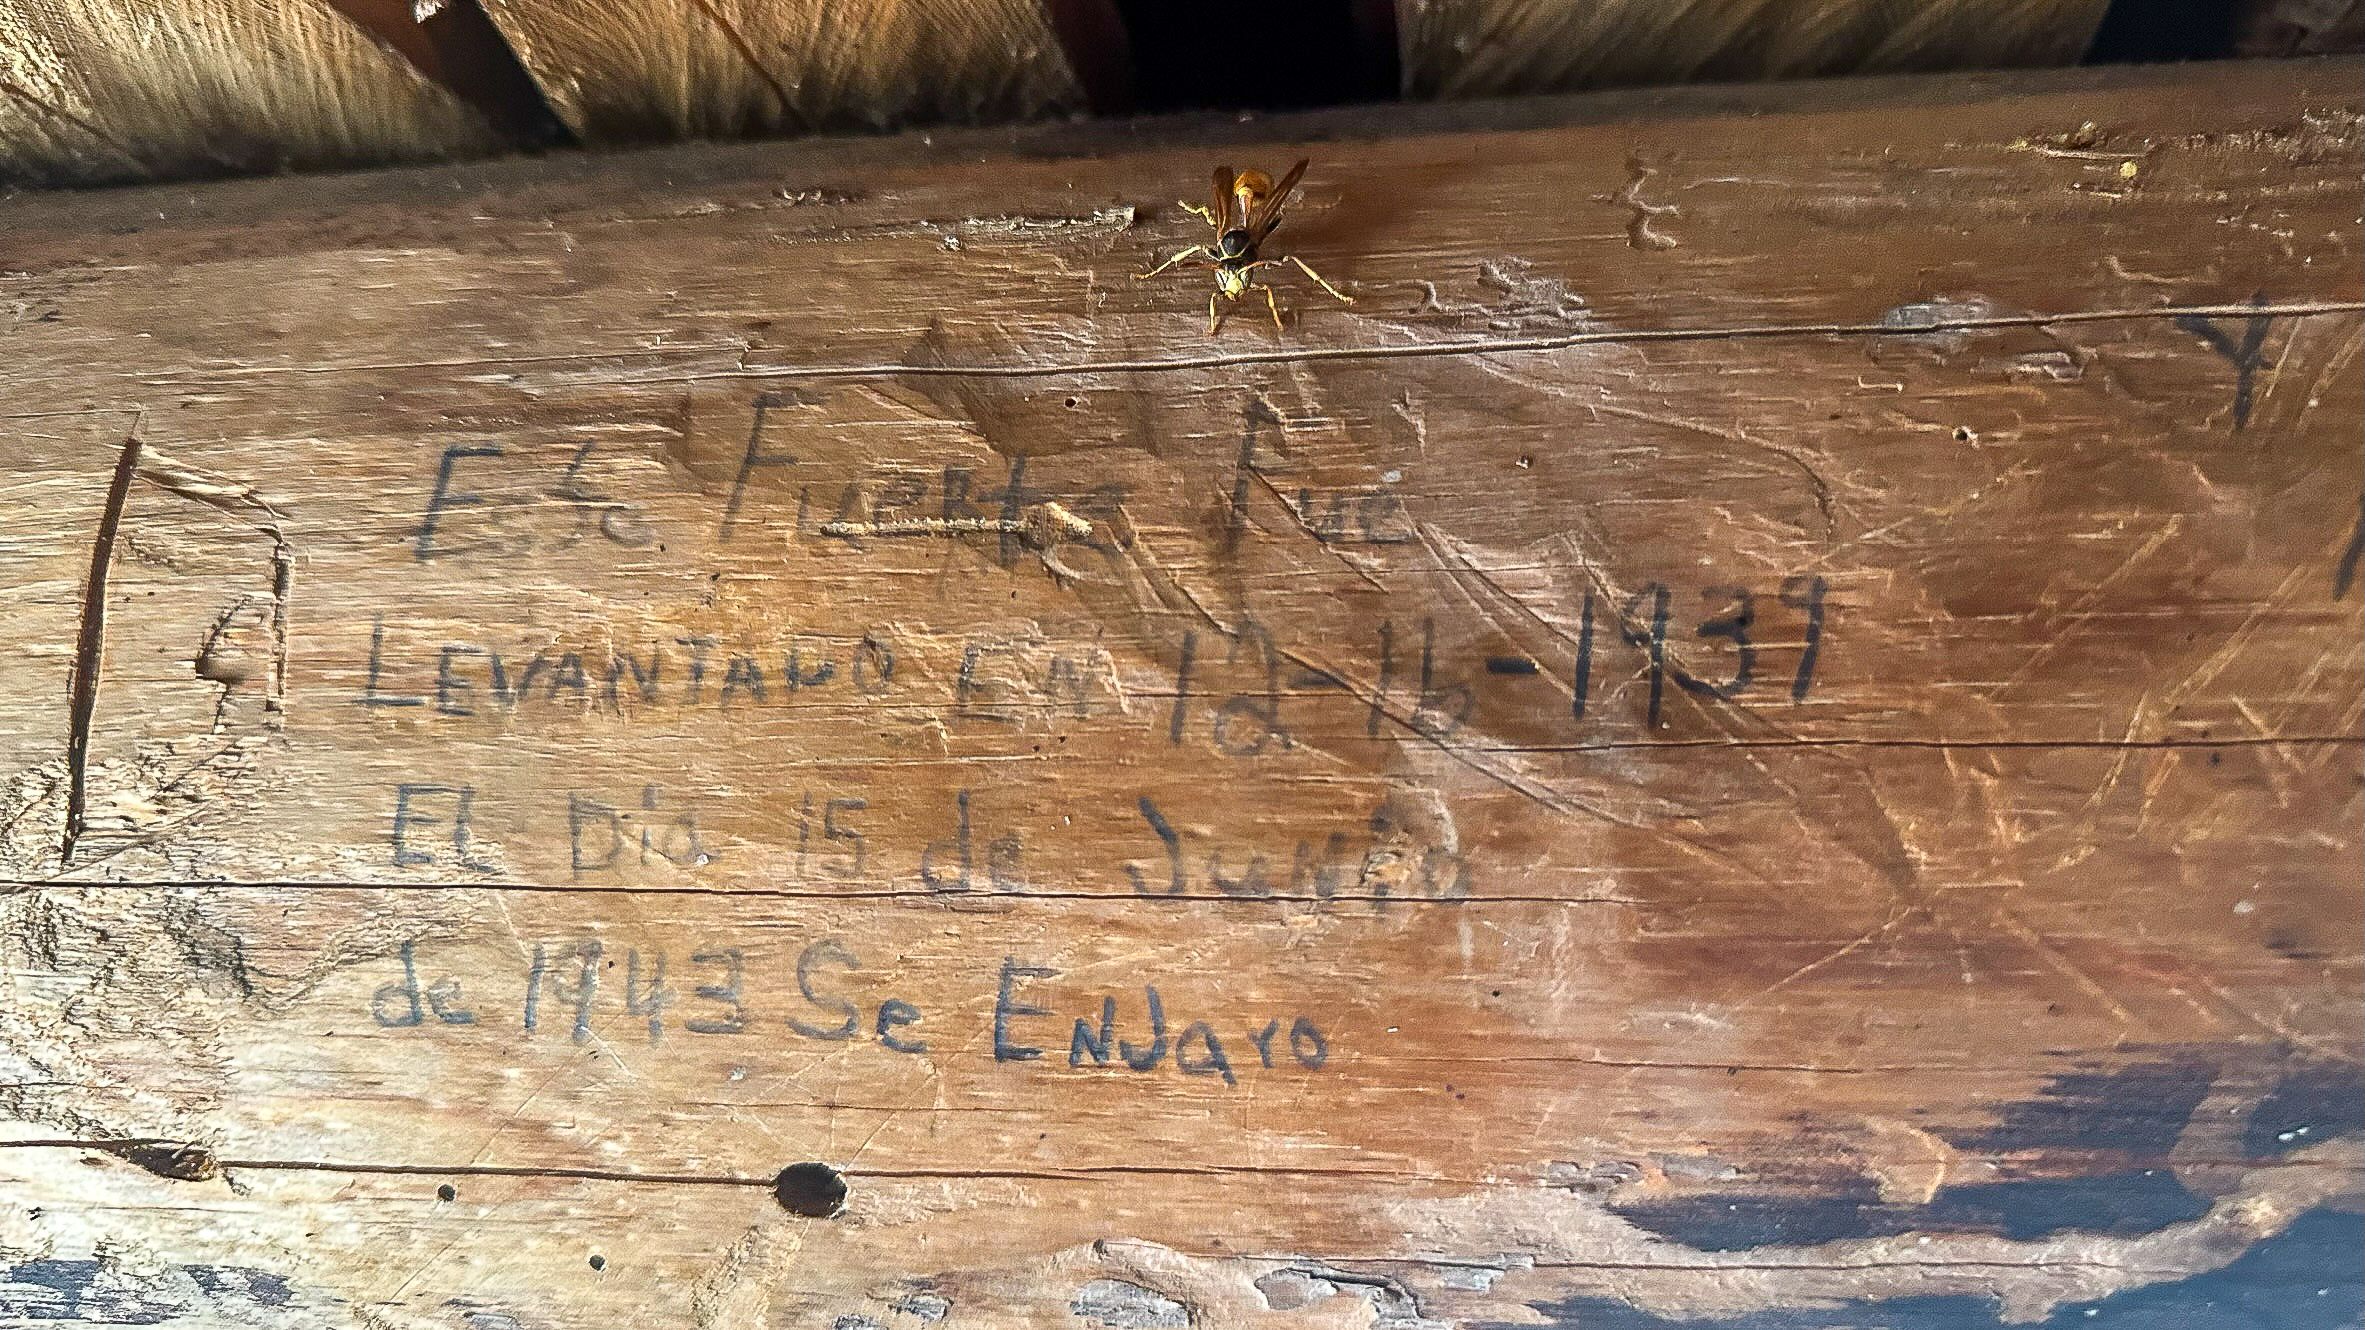 Moises Morales Jr., a rancher in Canjilon, New Mexico, shows the markings his grandfather made in a cabin he built in the 1930s in the Carson National Forest. Photo: Russell Contreras/Axios